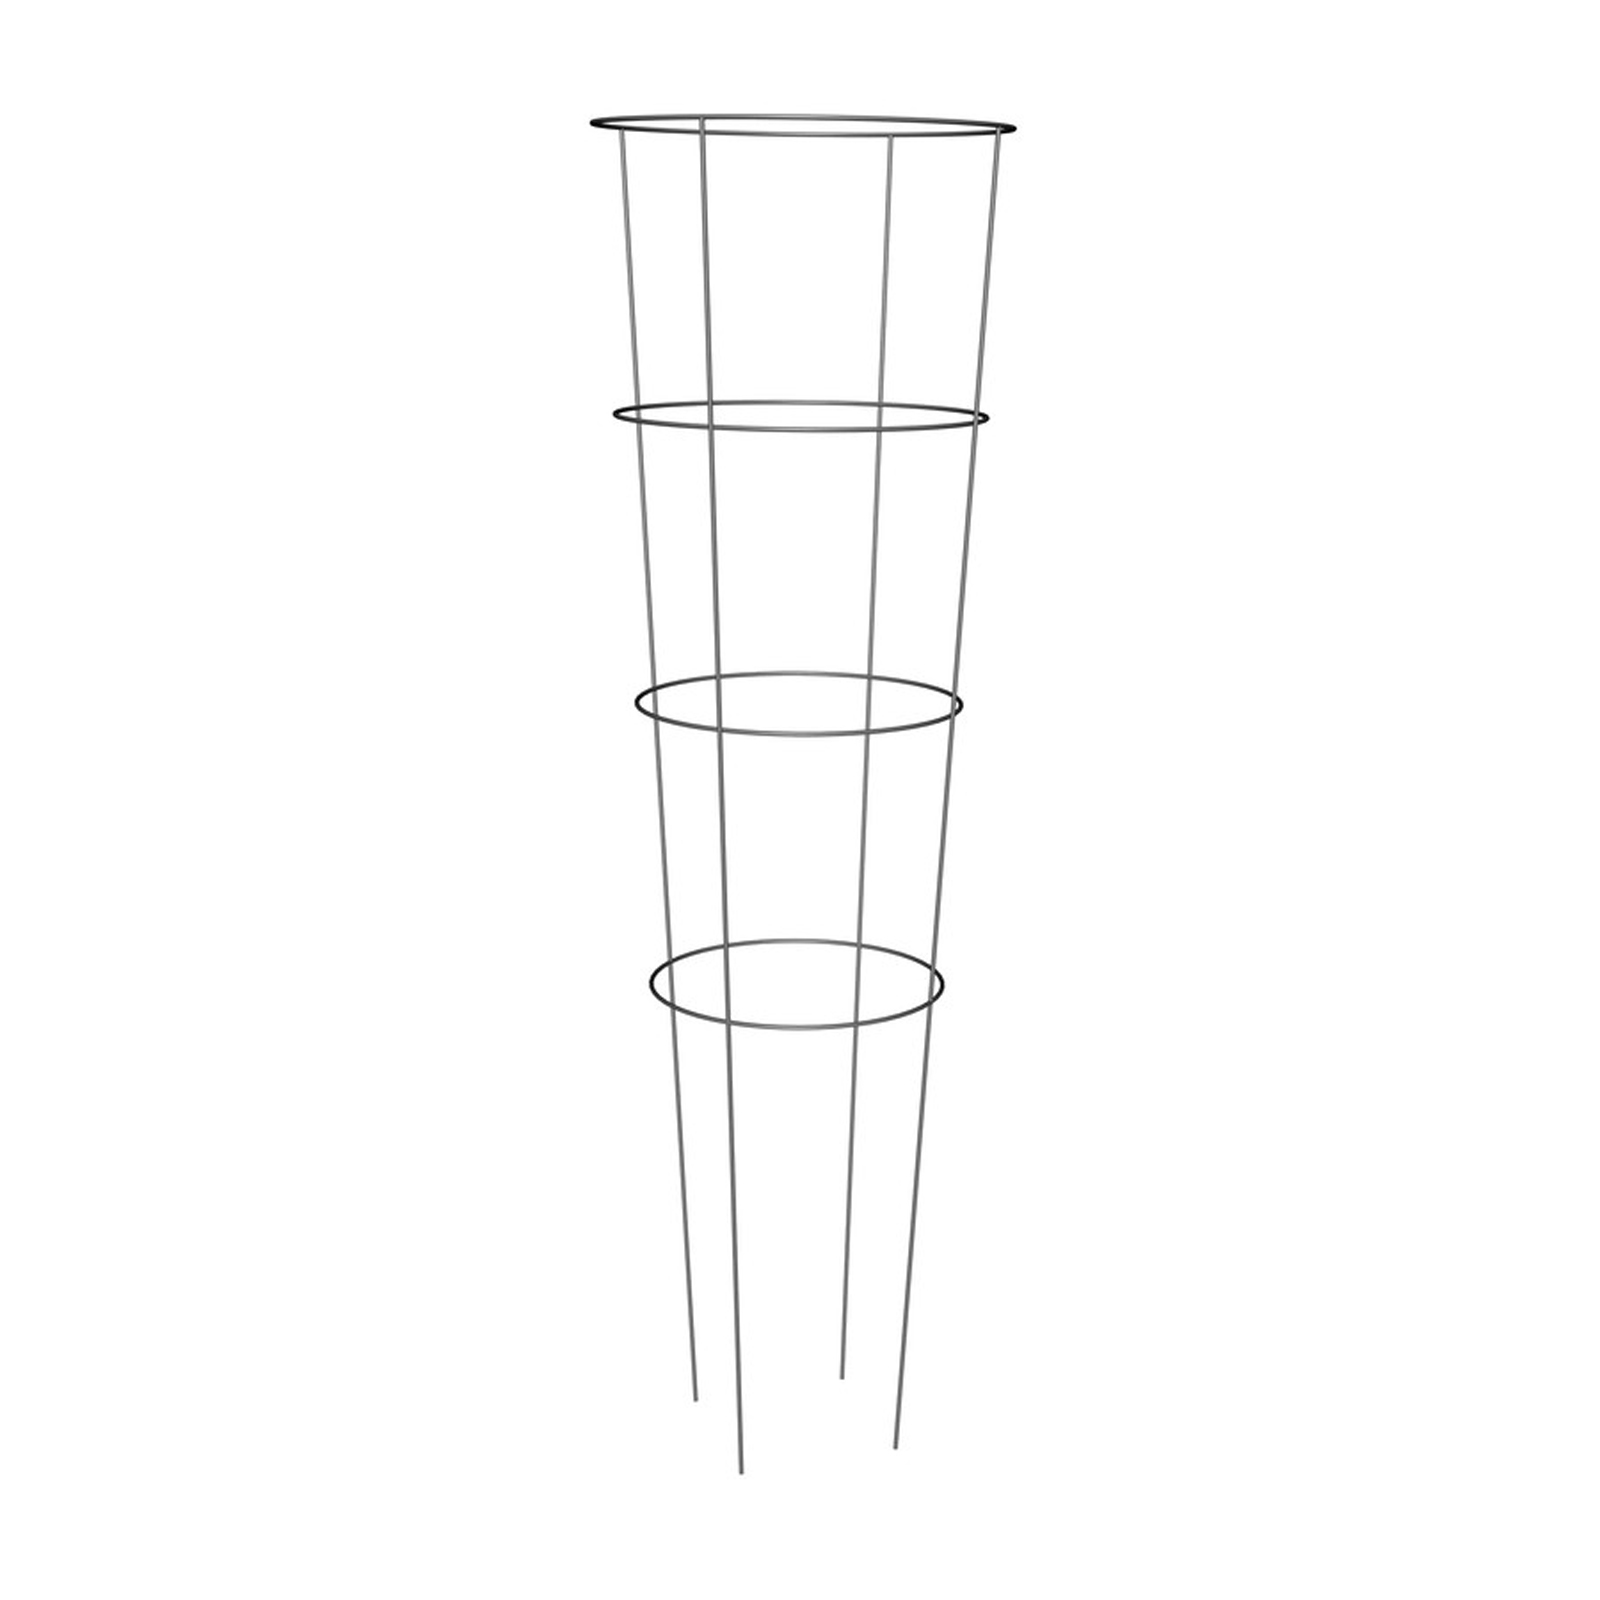 Large 54″ Tomato Cages Only $2.19 Each!